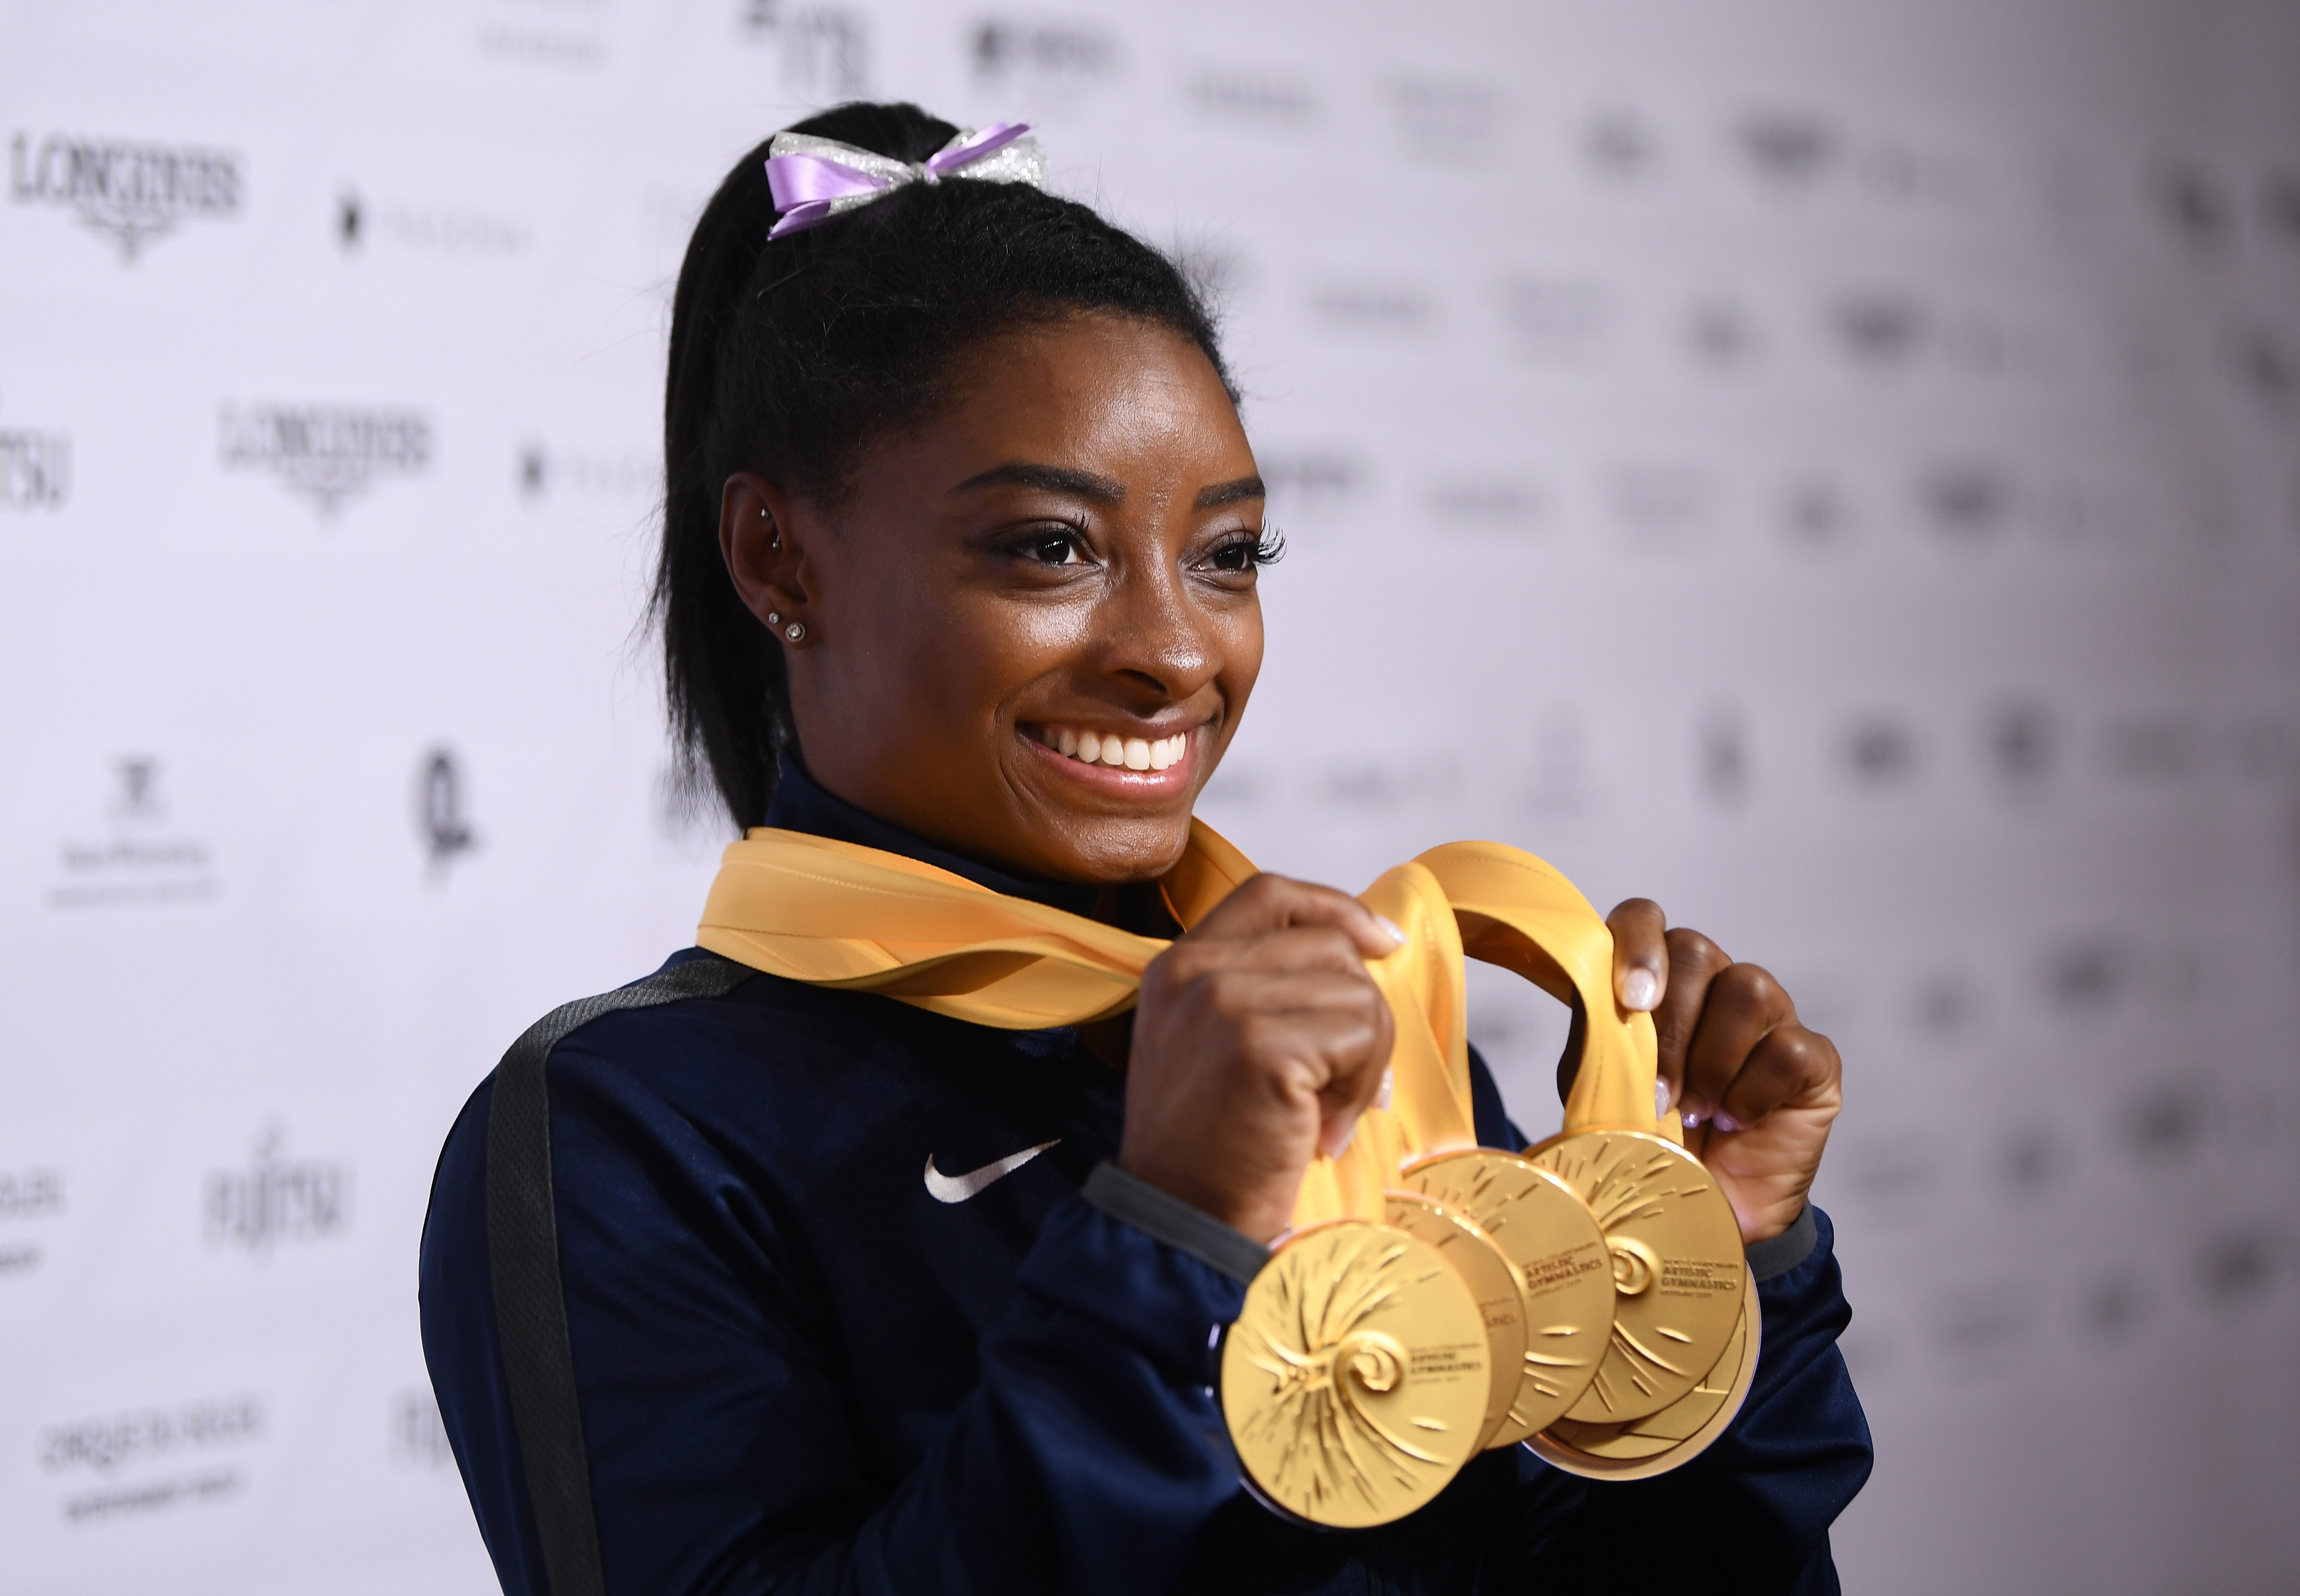 Simone Biles poses with her Medals at the FIG Artistic Gymnastics World Championships on Oct. 13, 2019 in Stuttgart, Germany. | Photo: Getty Images